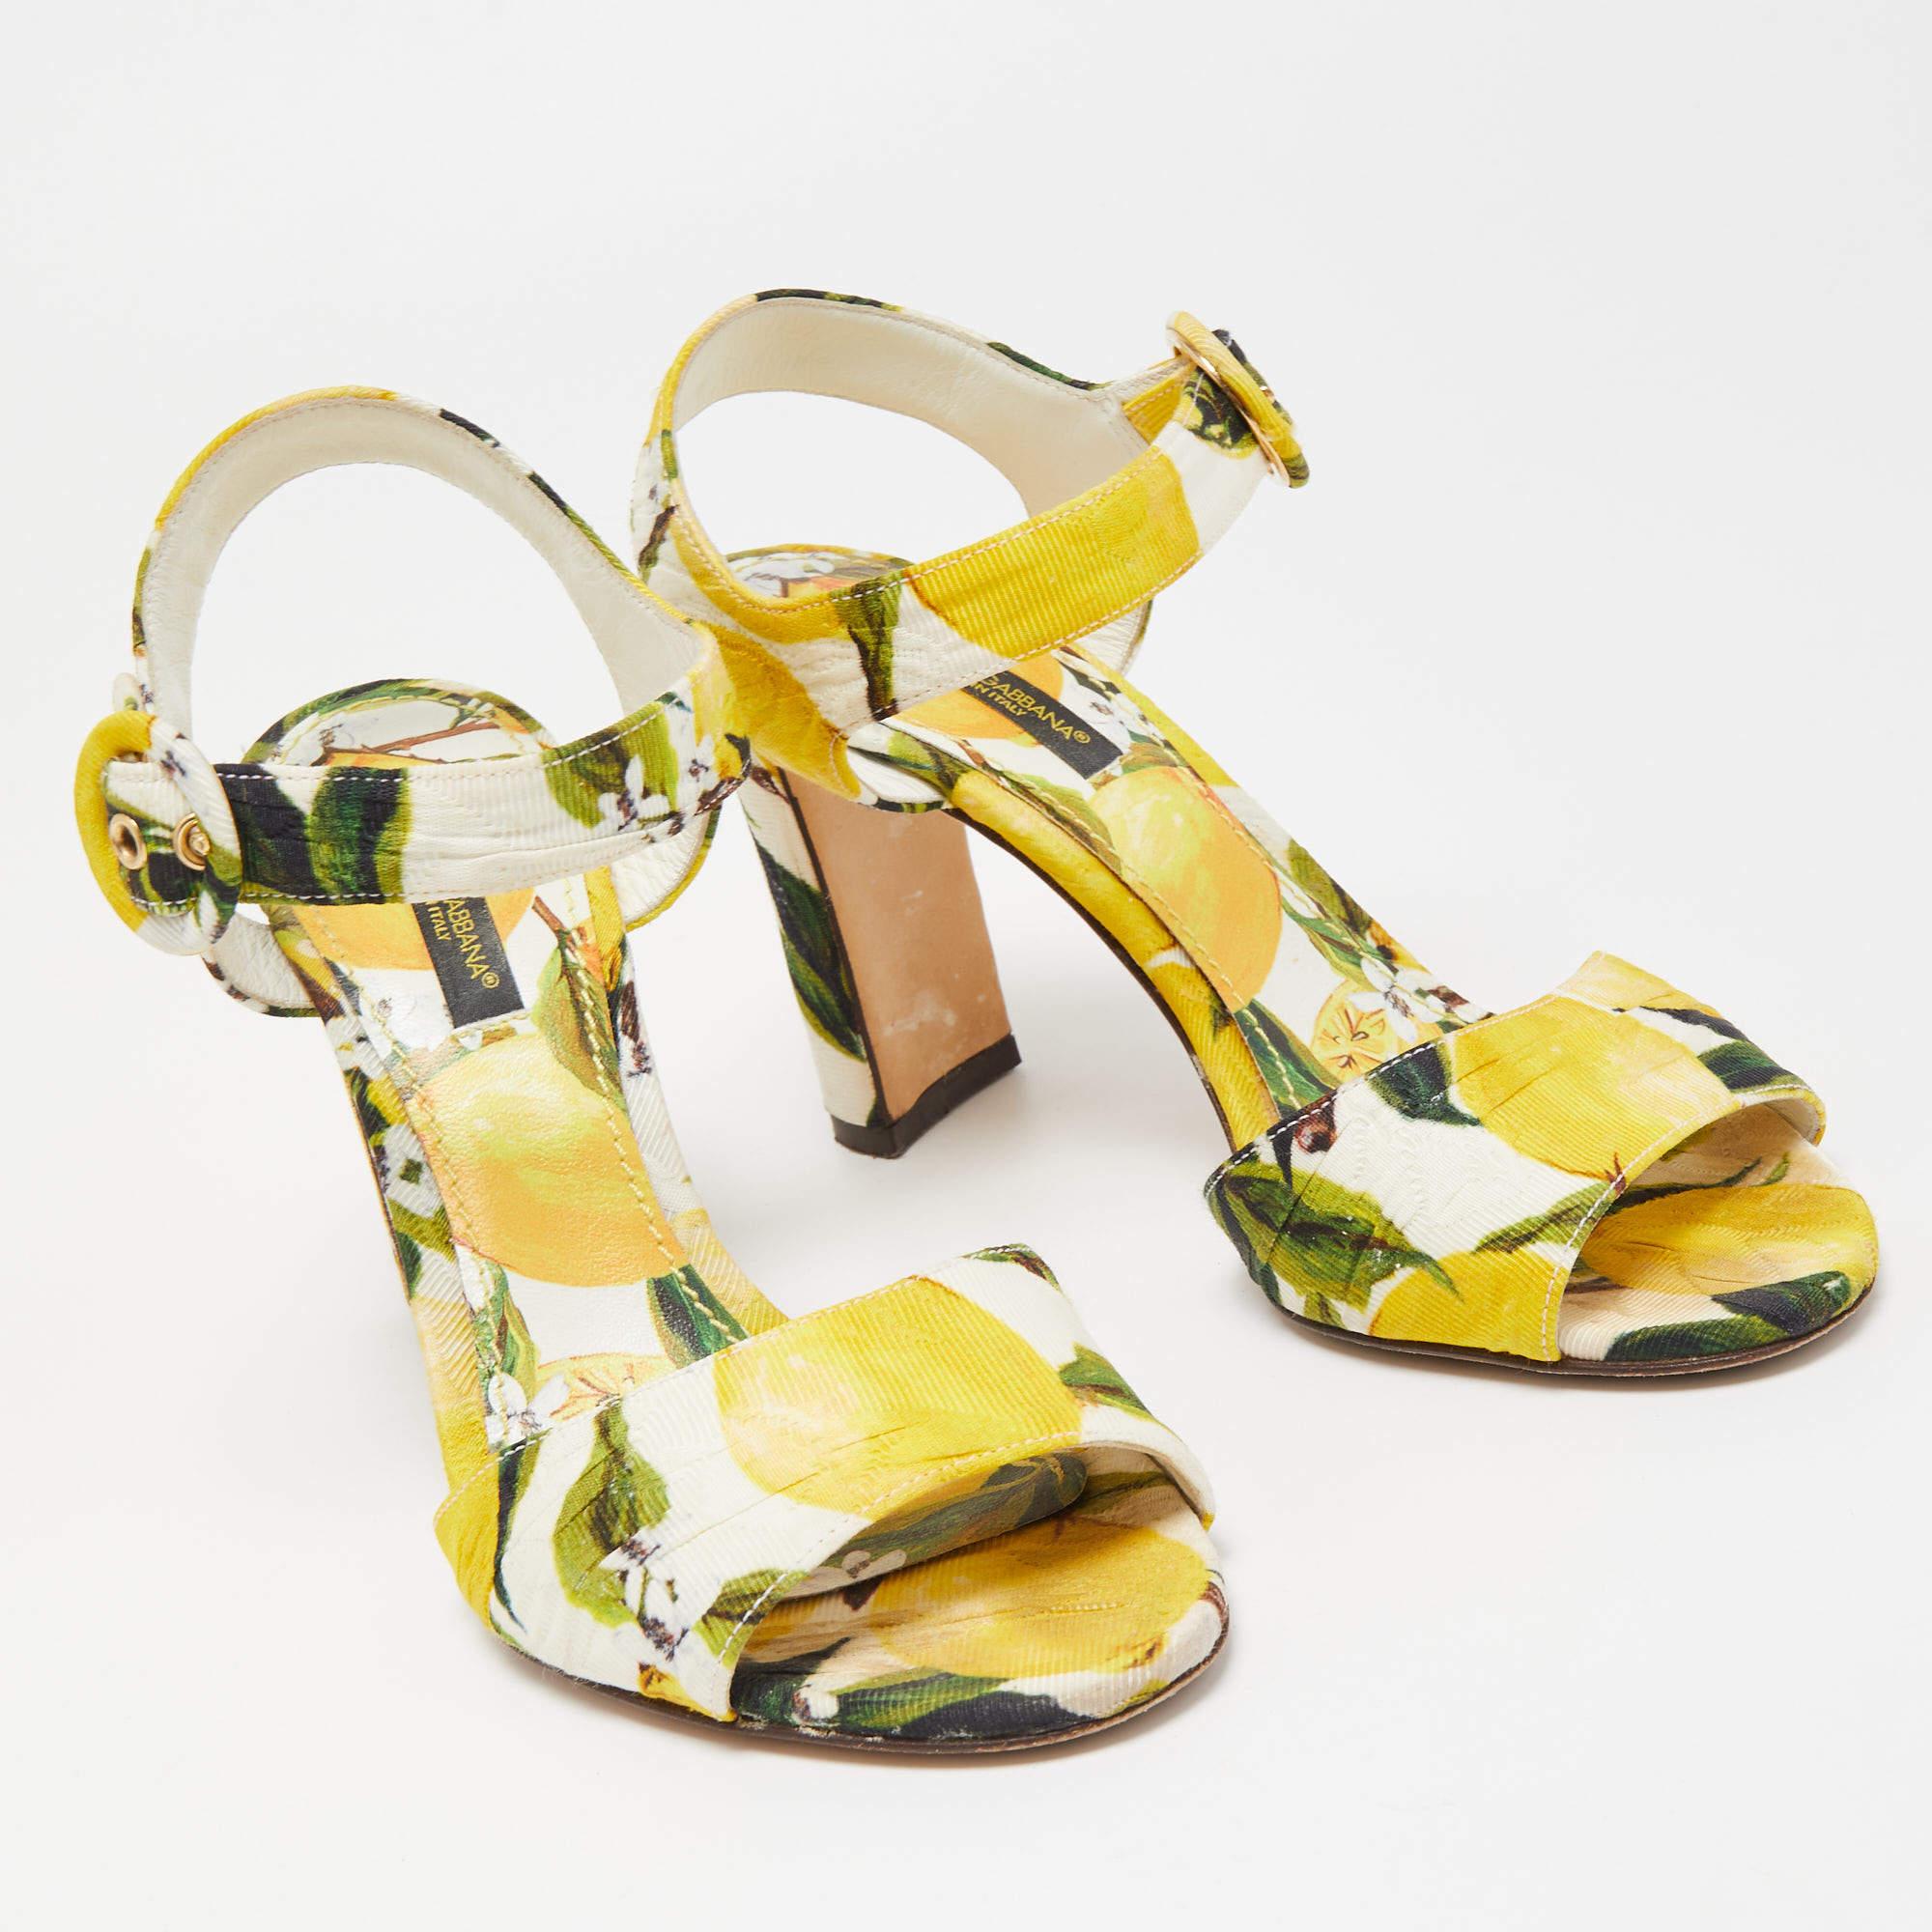 These Dolce & Gabbana sandals are so pretty, they make our hearts flutter with joy! Made in Italy, this pair has a fabric exterior adorned with a vibrant print and ankle straps with a side buckle fastening. The sandals are complete with heels that